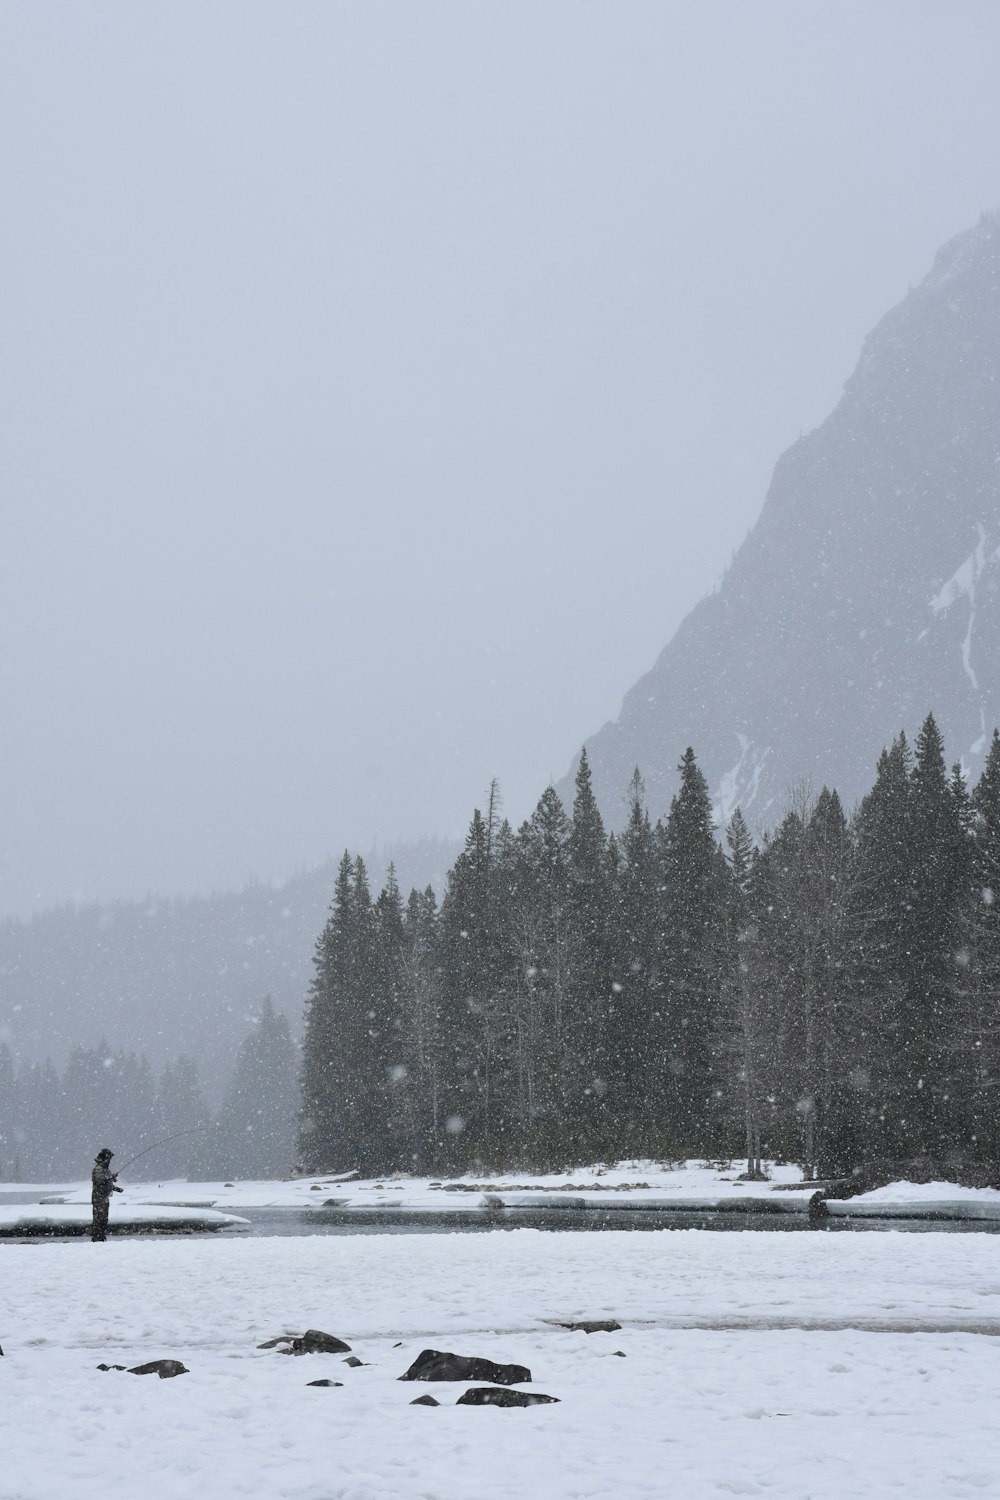 person fishing near body of water during snow